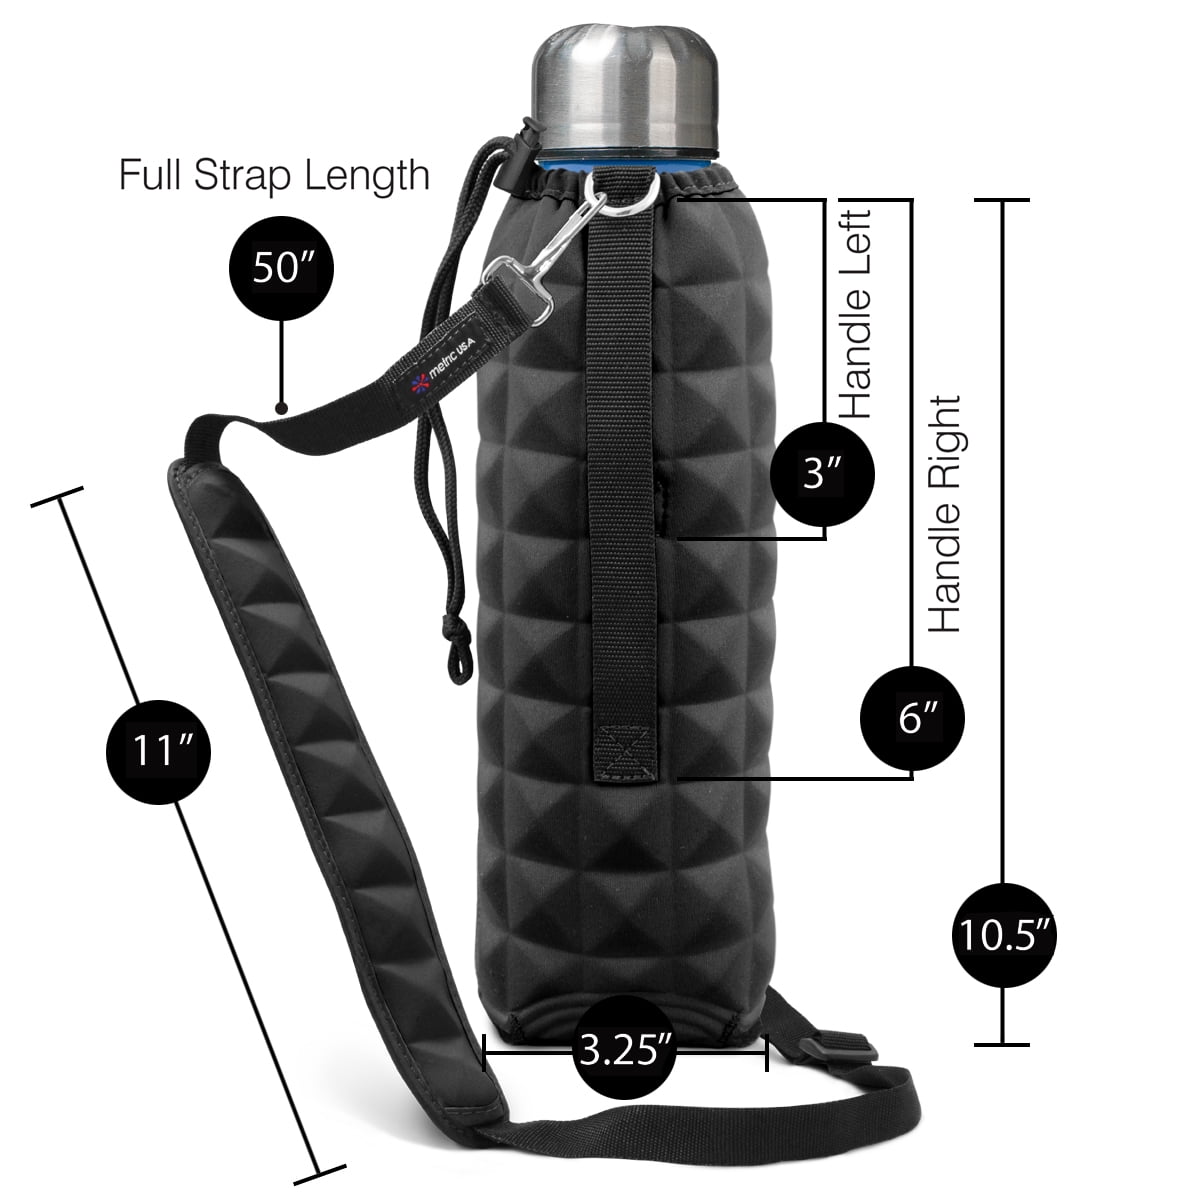  Xxerciz Water Bottle Carrier Holder with Strap for